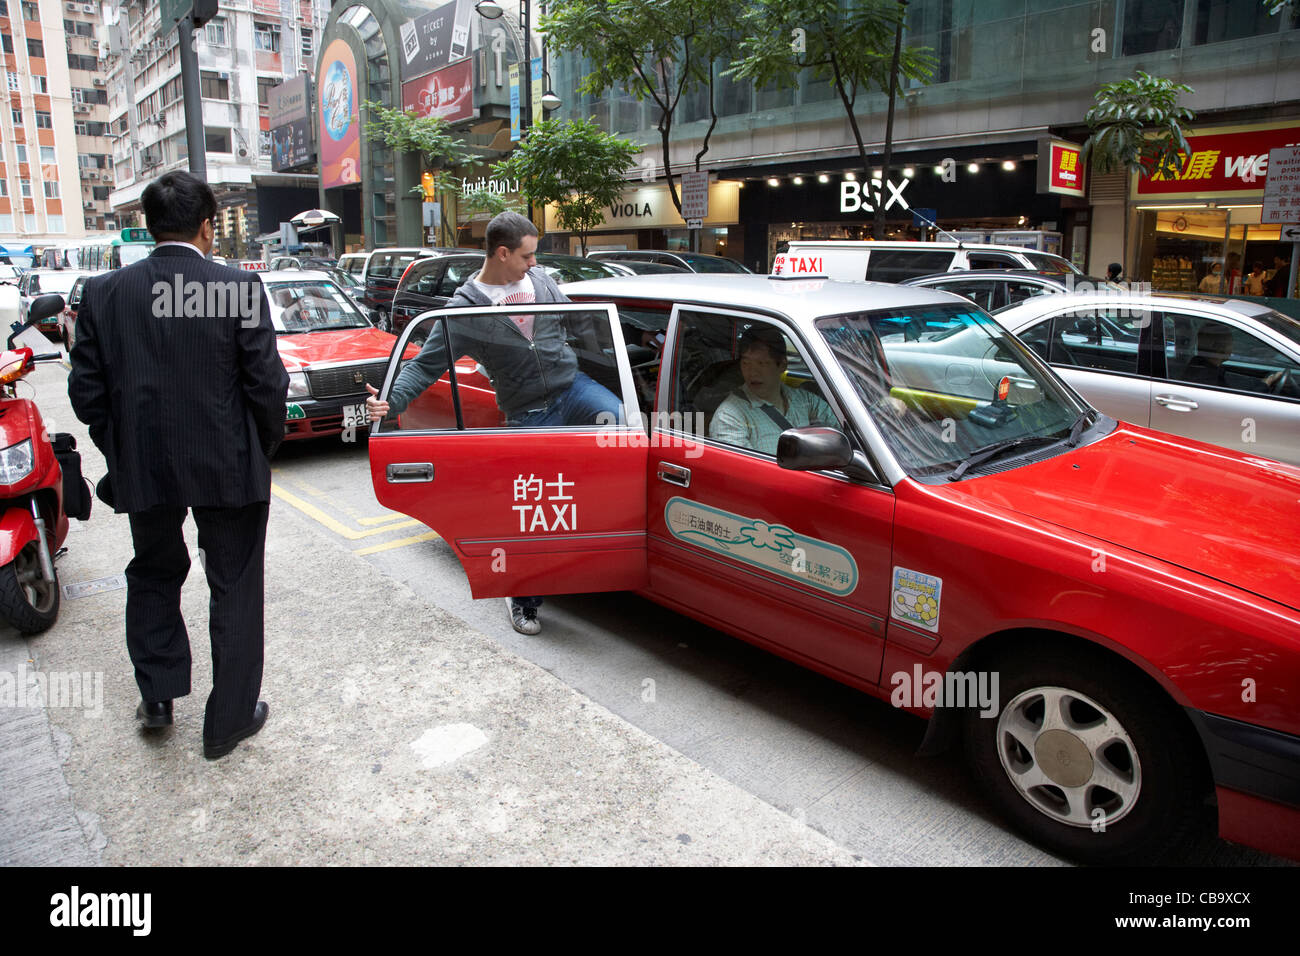 western tourist getting into a cab in the front of a row of hong kong red cabs downtown taxi rank hong kong island hksar china Stock Photo